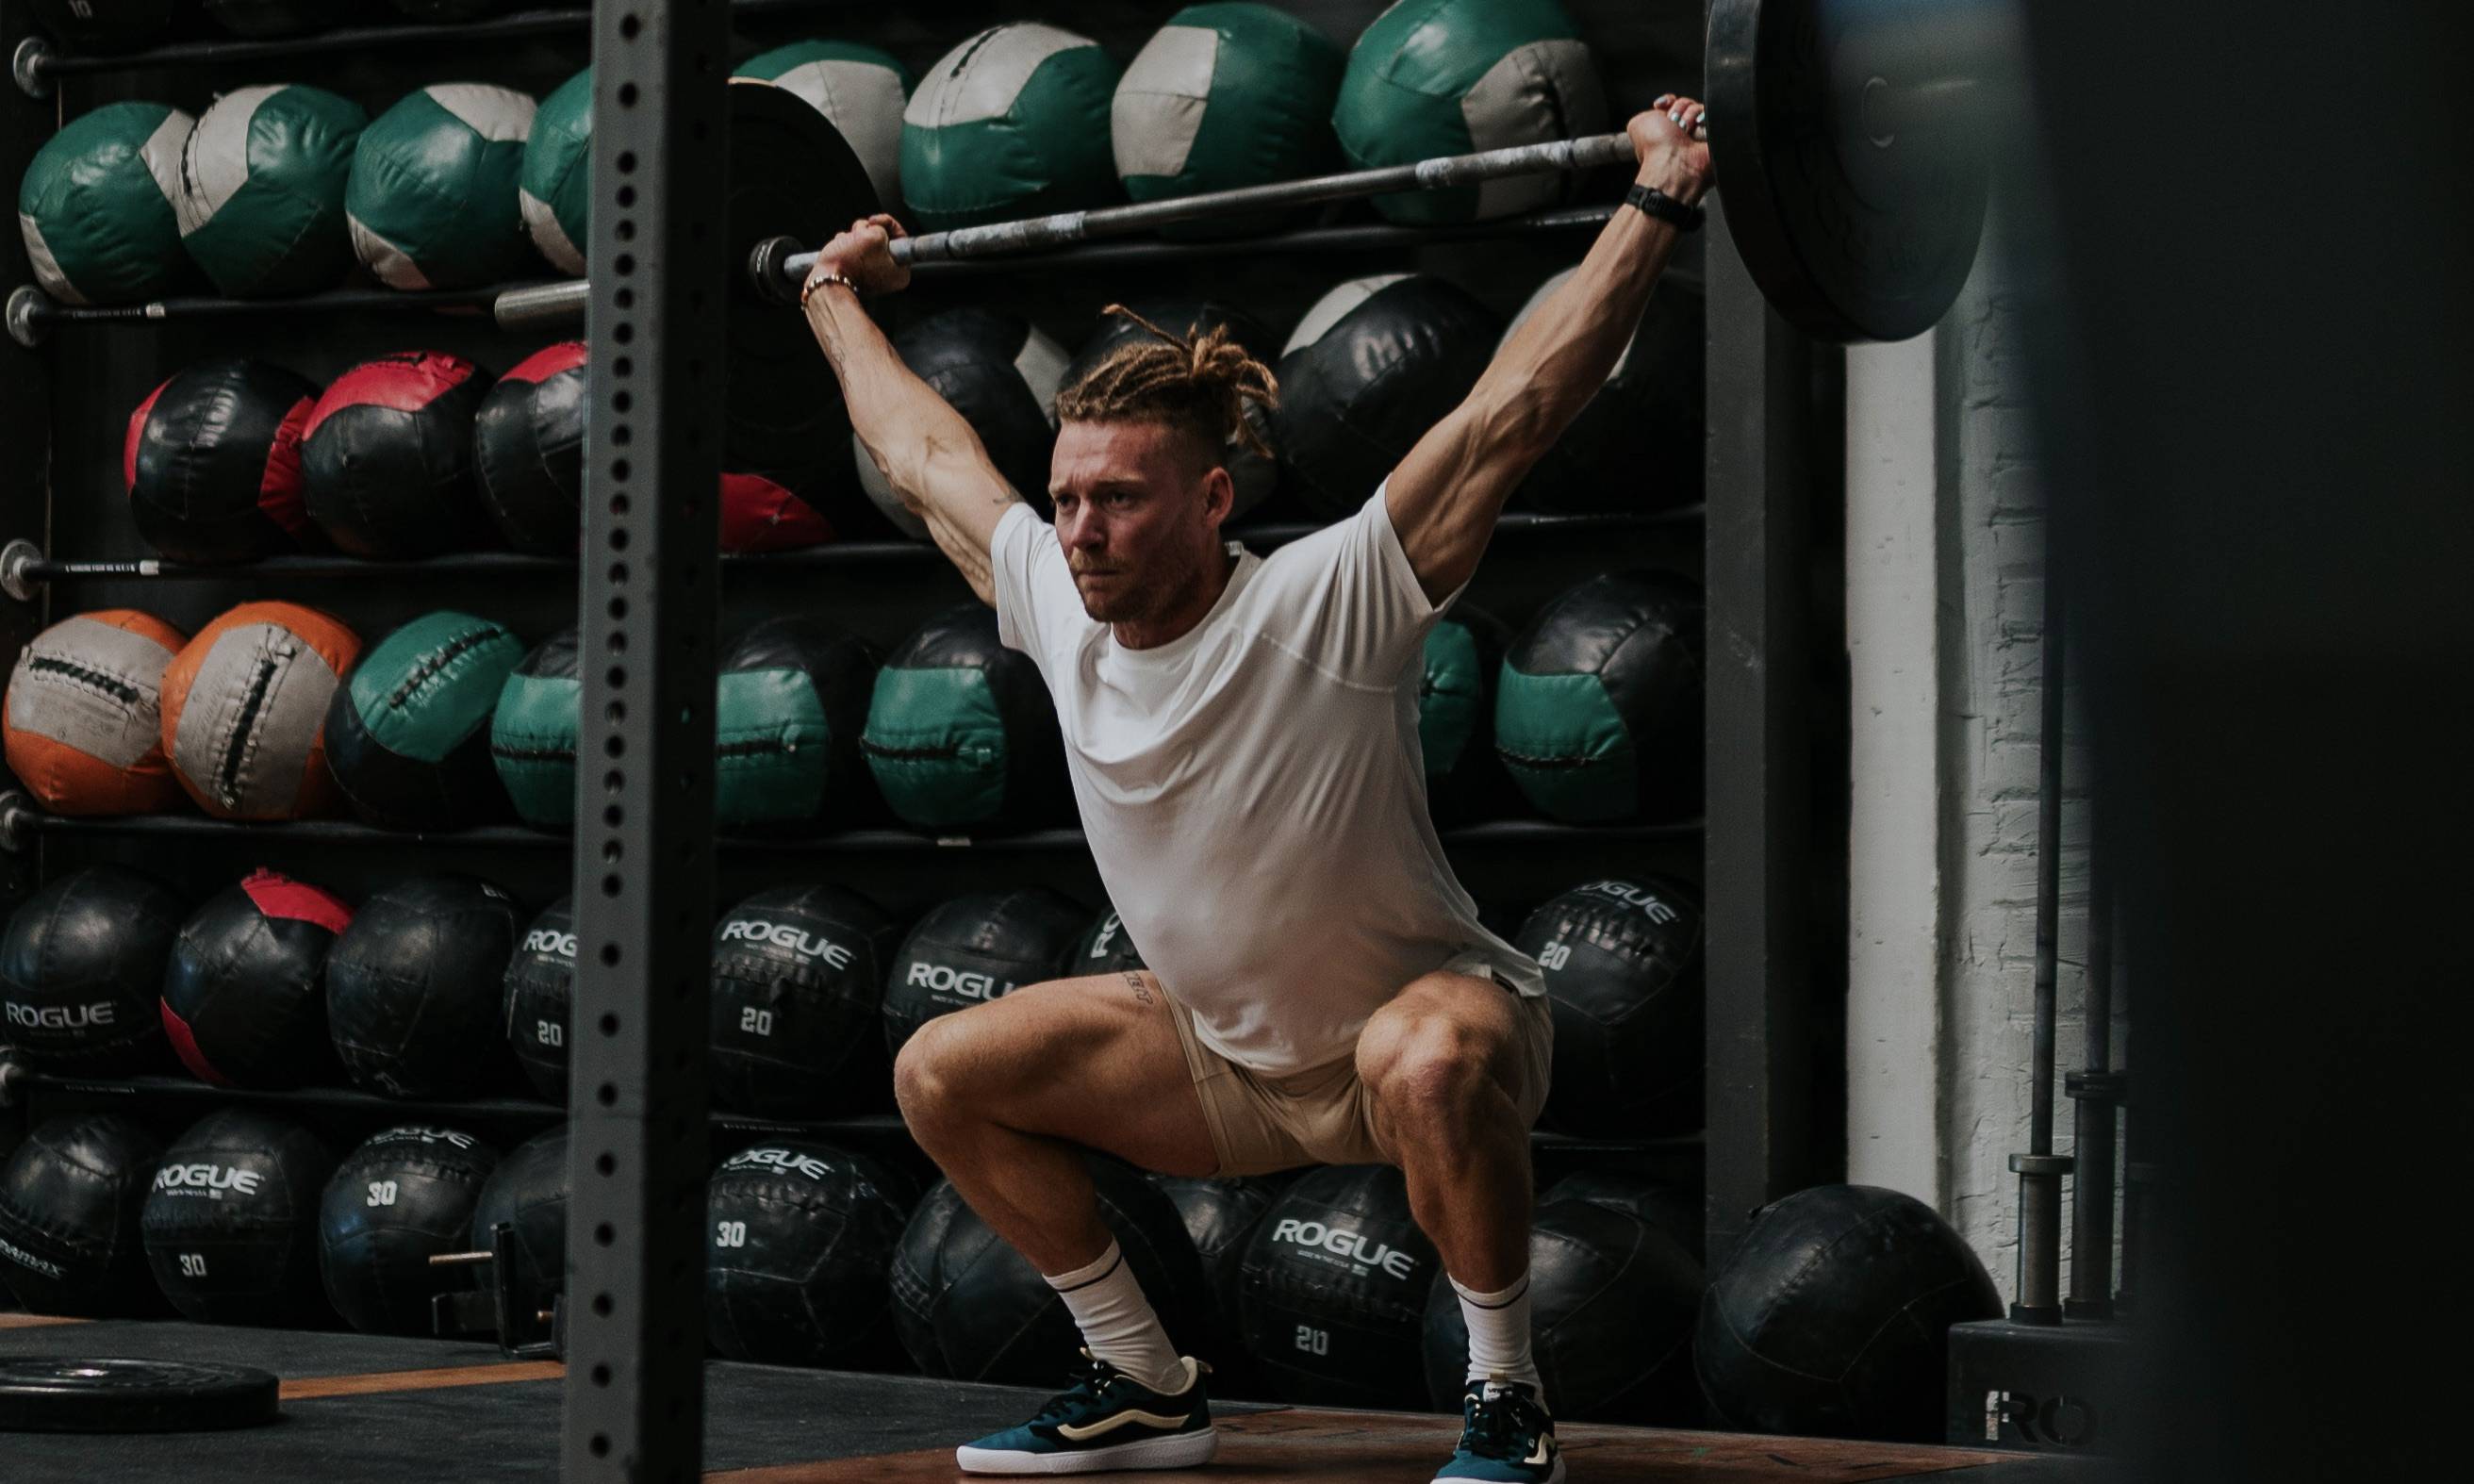 man lifting barbell above his head